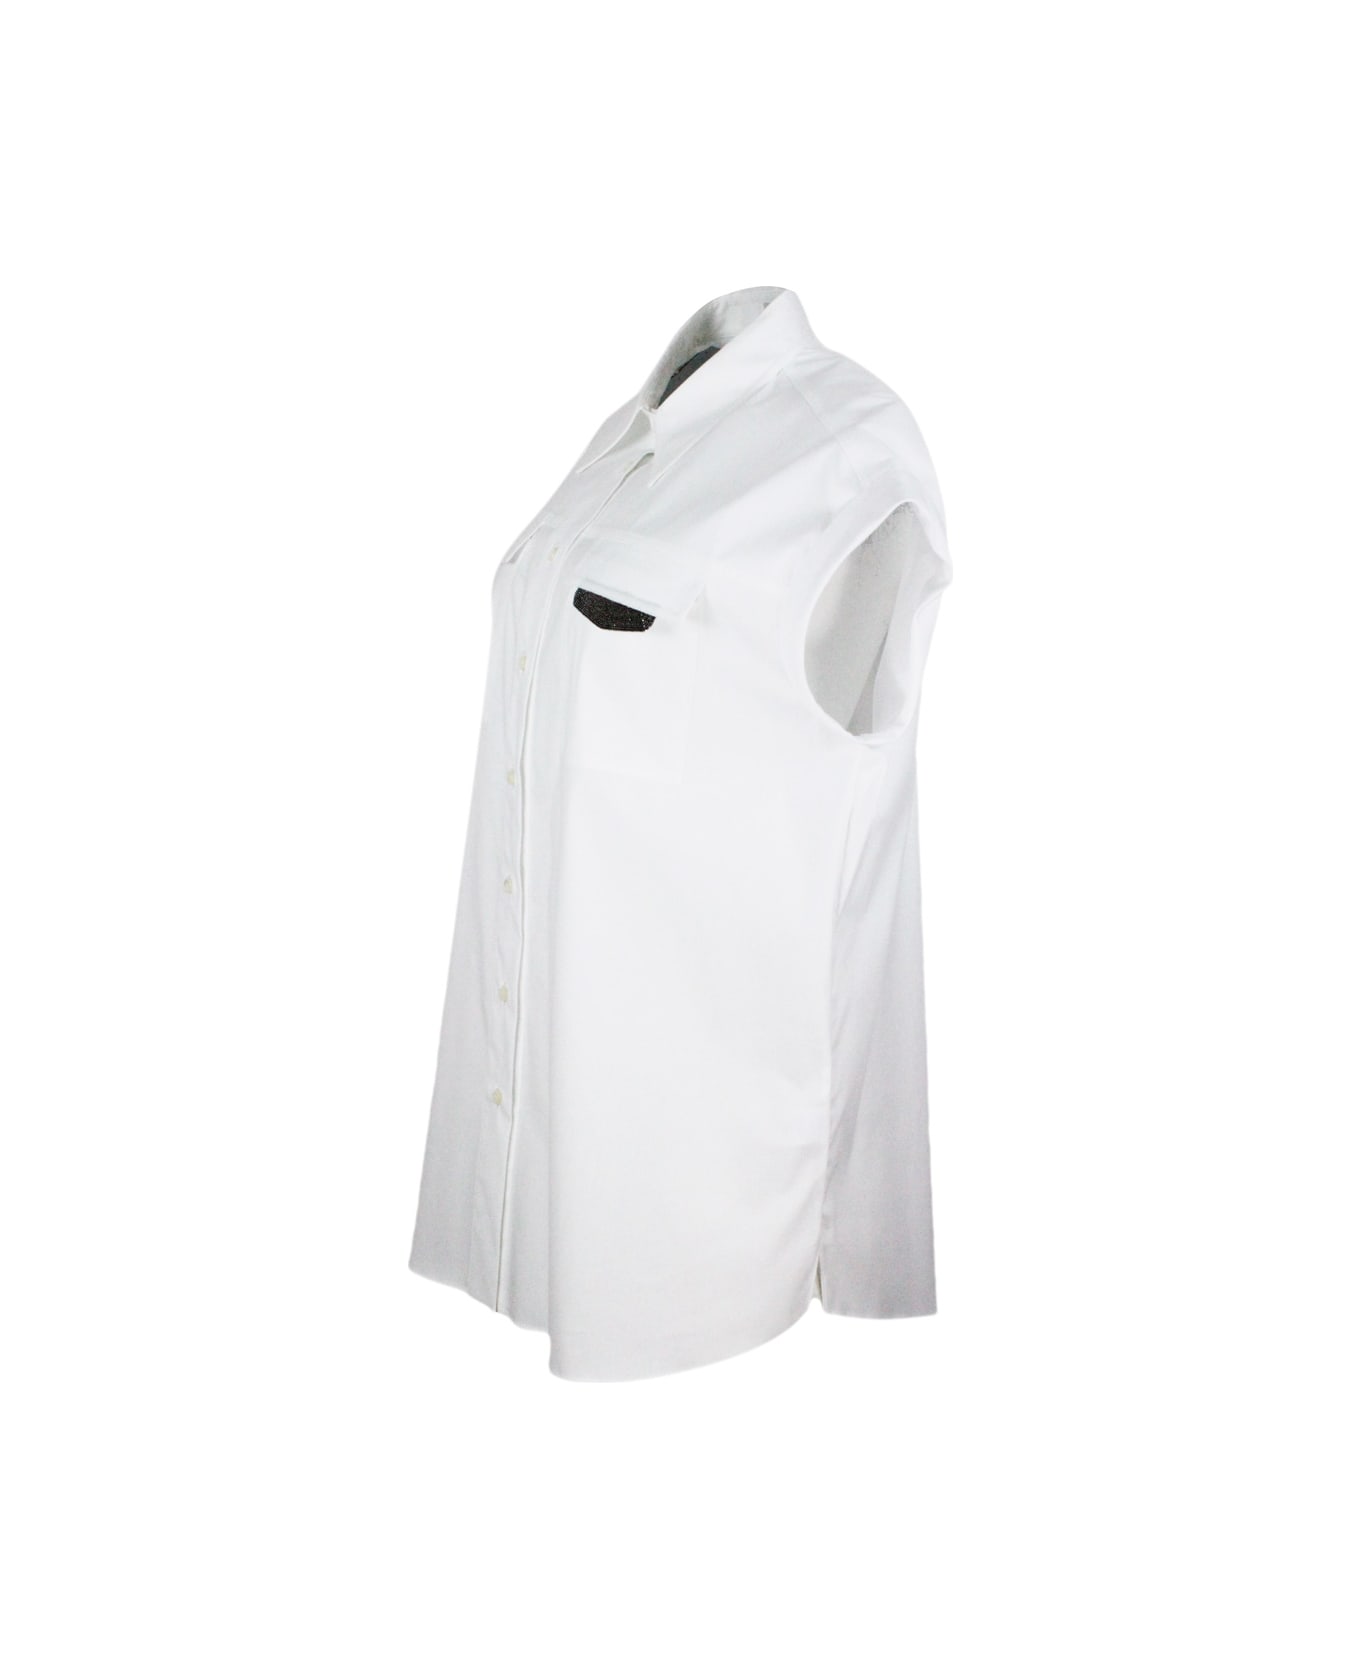 Brunello Cucinelli Sleeveless Shirt With Front Pockets Embellished With Shiny Jewels - White シャツ